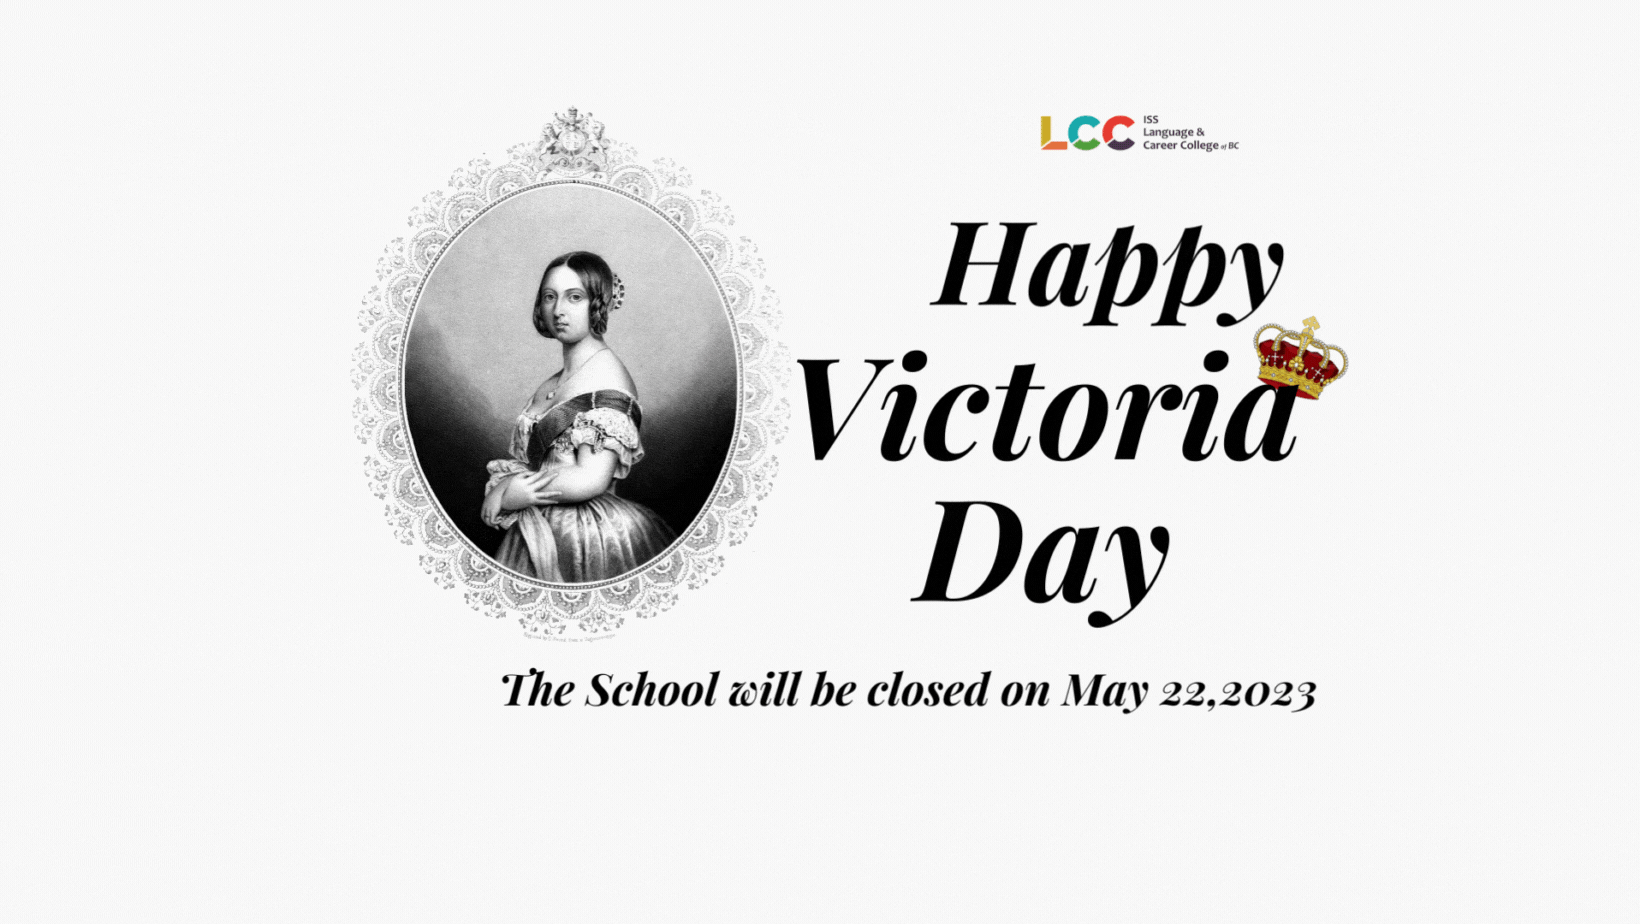 Happy Victoria Day. The School will be closed on May 22, 2023.